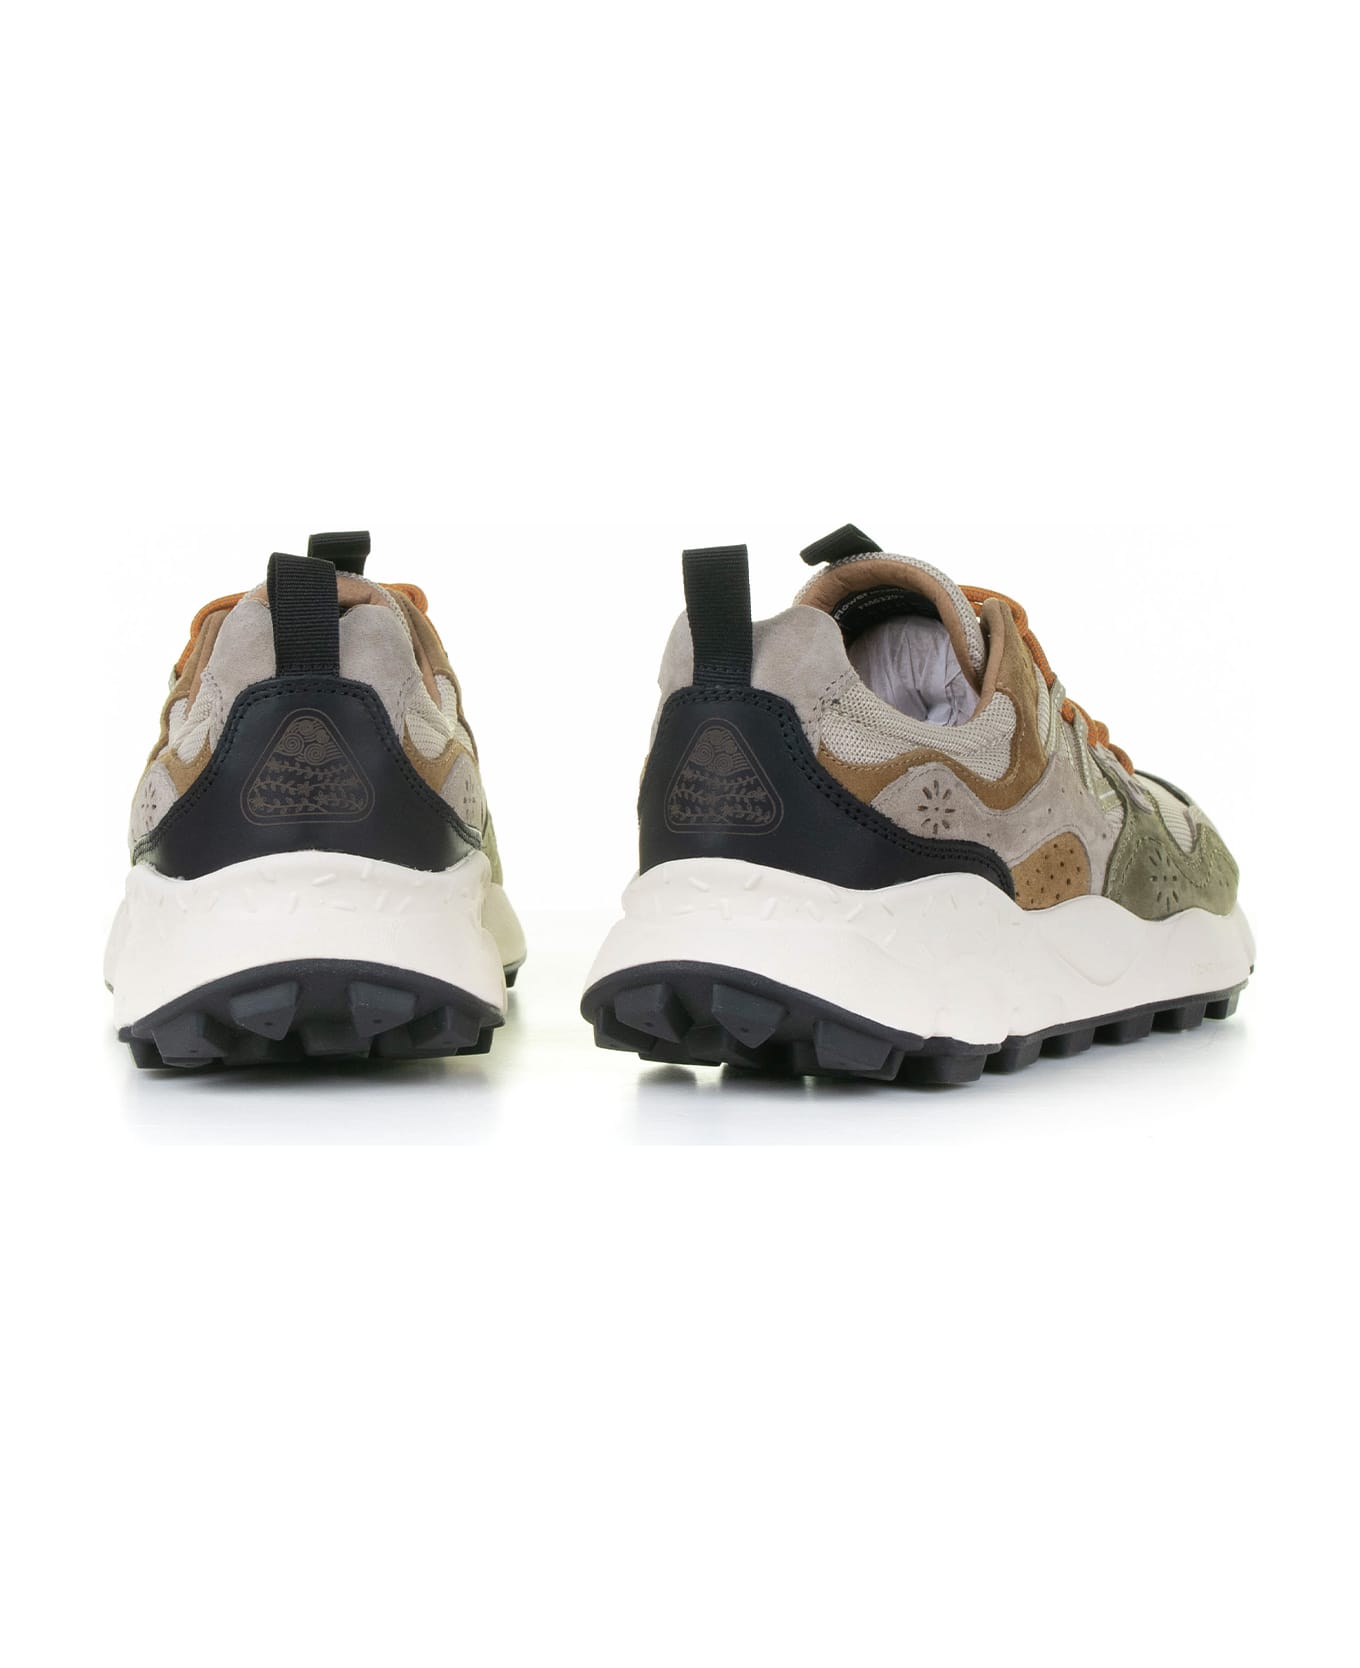 Flower Mountain Yamano Men's Sneaker In Suede And Nylon - SAND MILITARY スニーカー